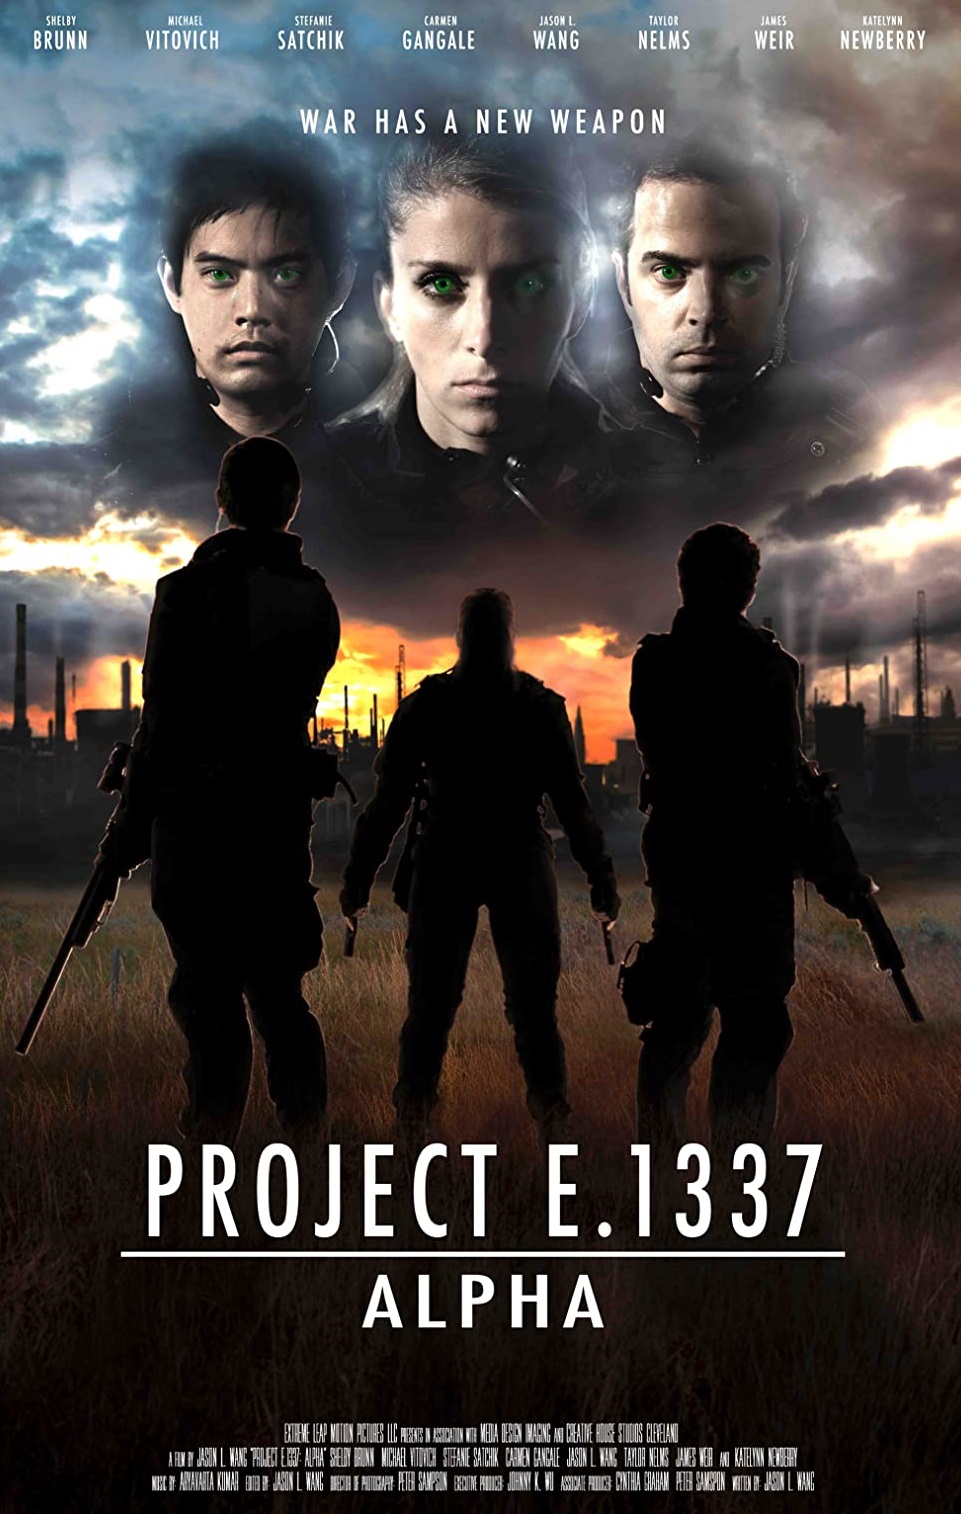 Project E.1337: ALPHA 2022 Tamil Dubbed Action Movie Online